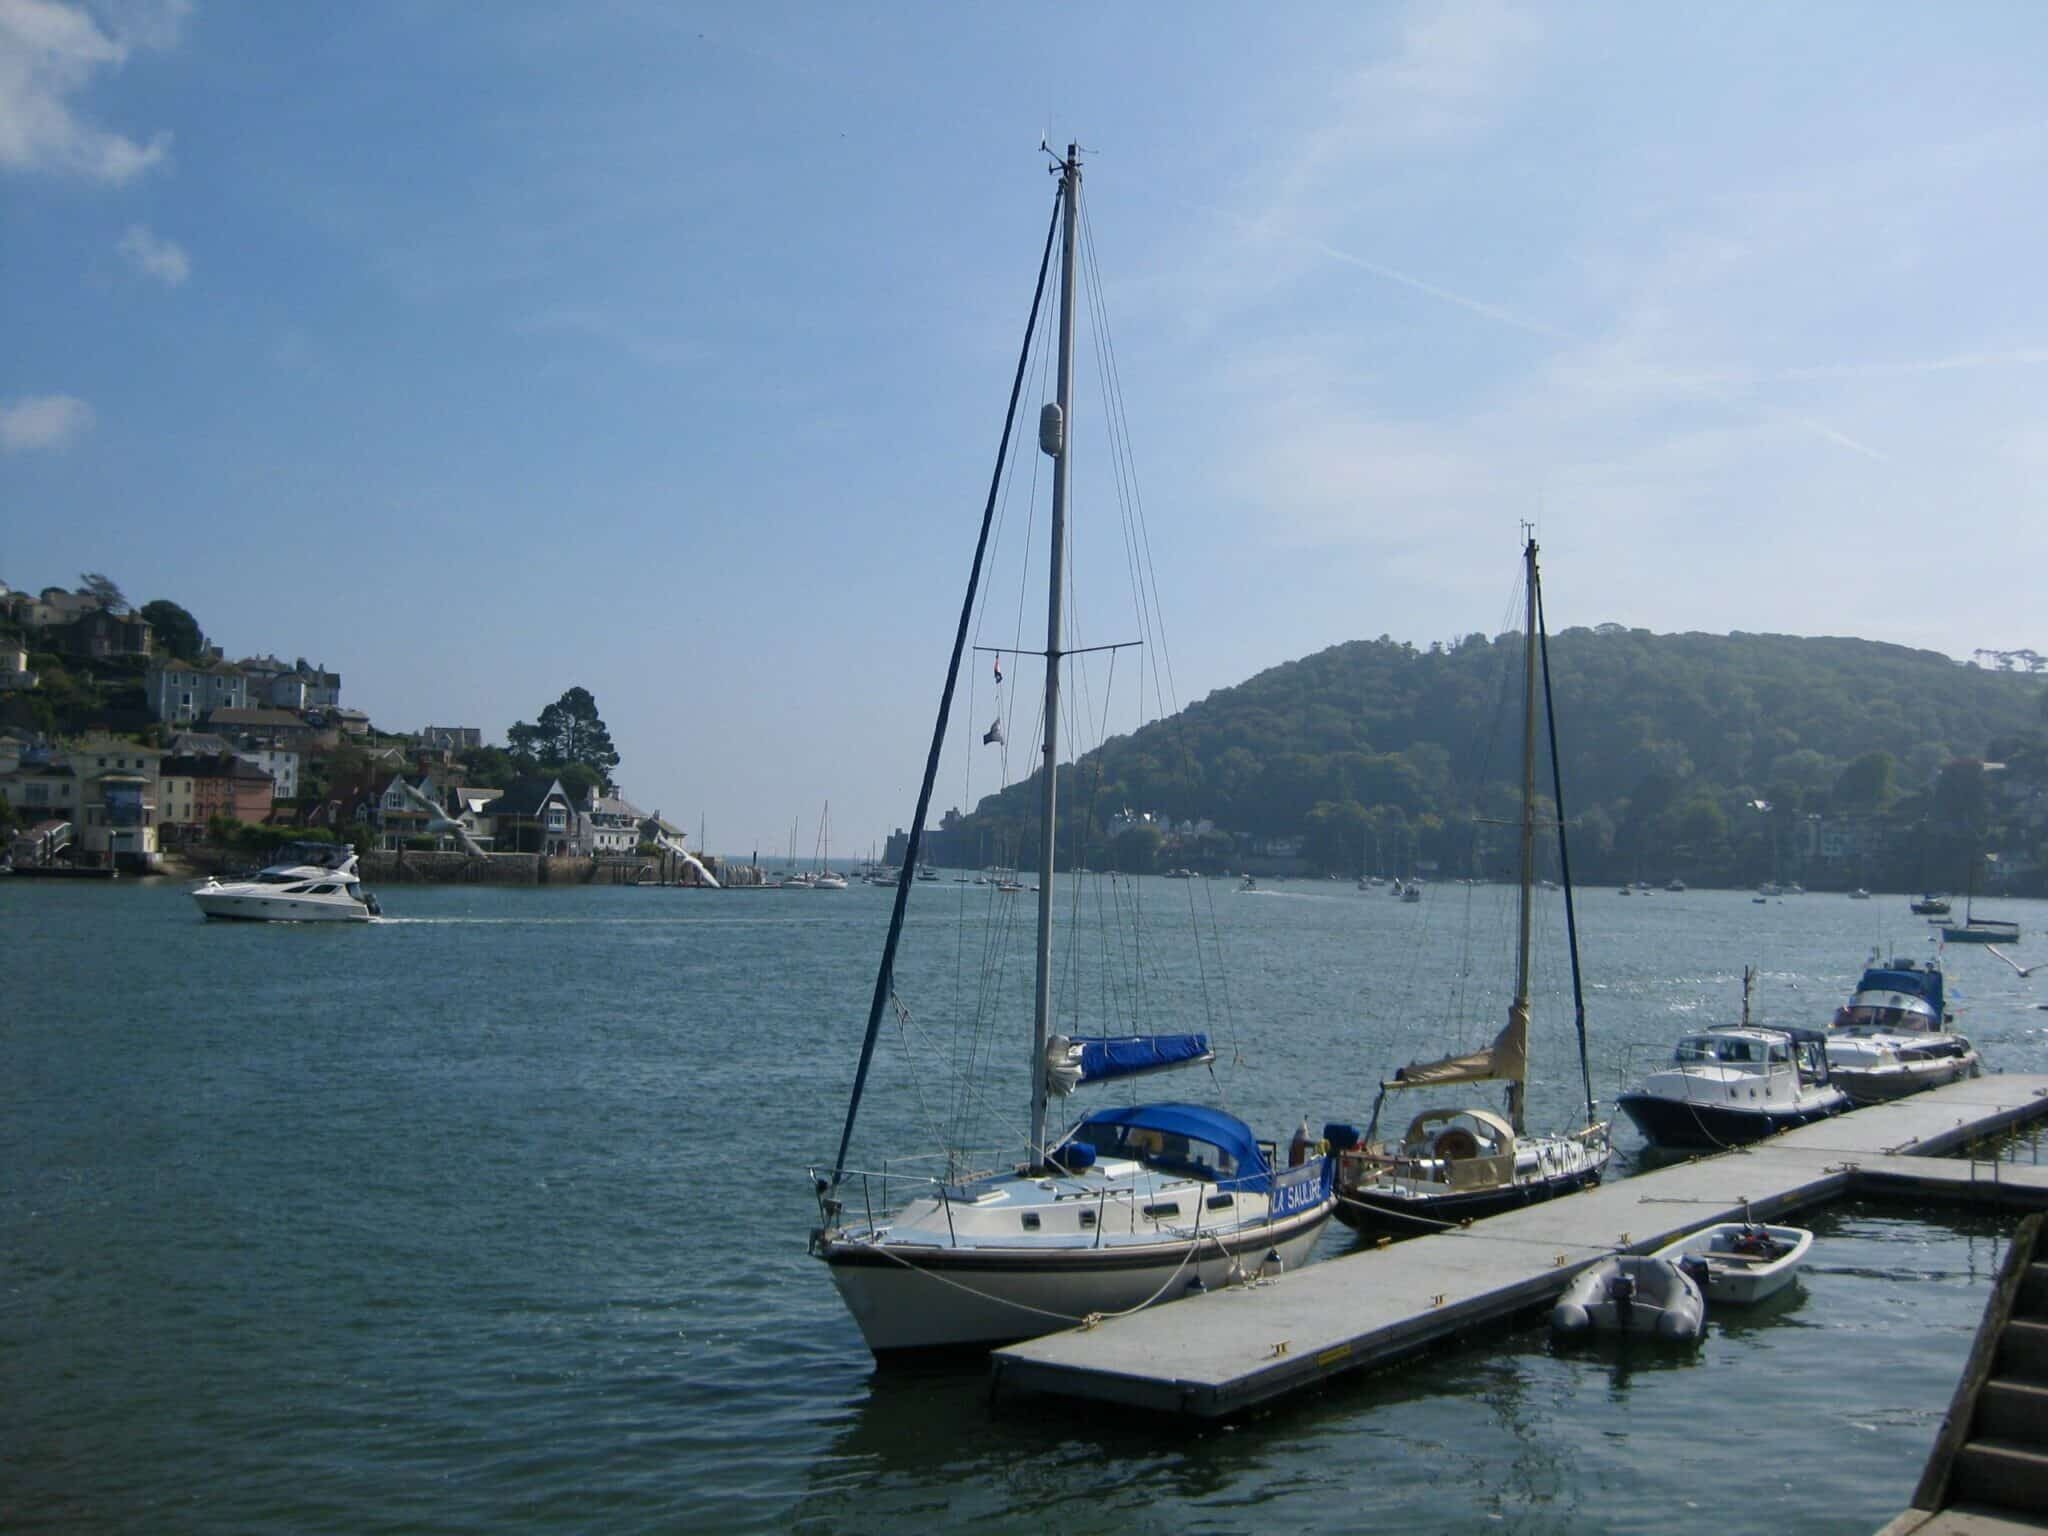 Day trip: Charming Dartmouth with the ancient Steam Railway